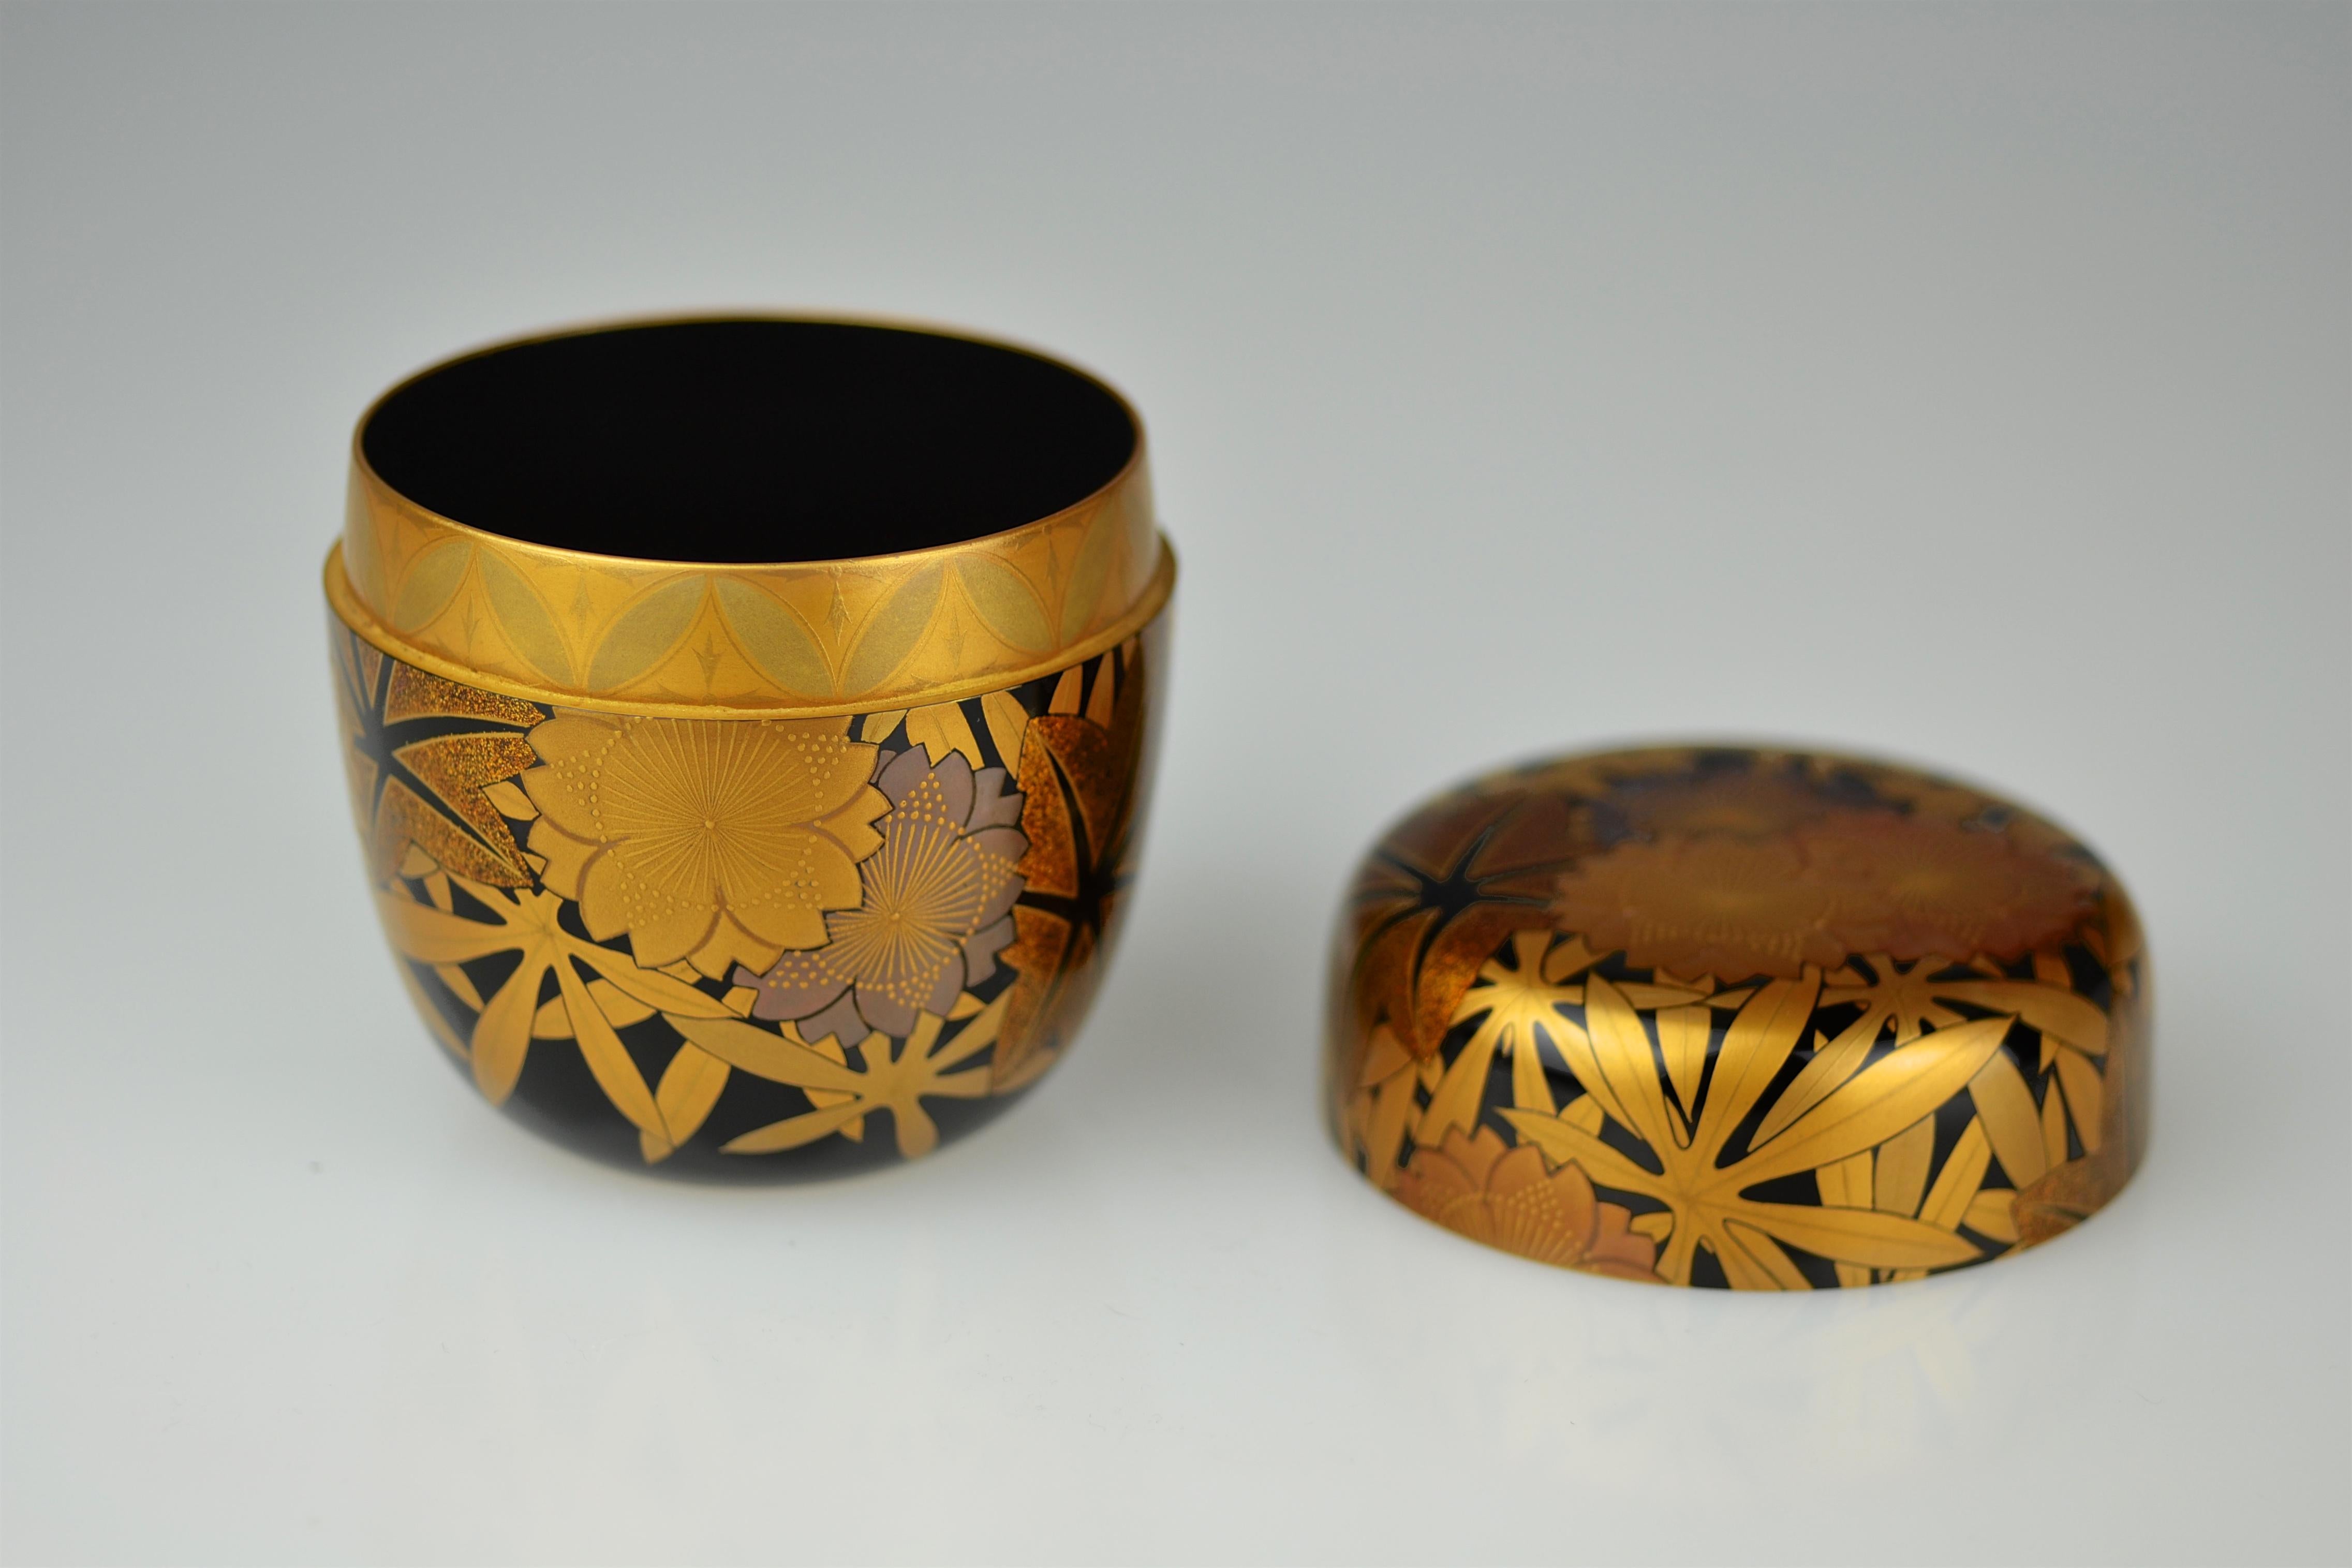 Gold Lacquer Tea Caddy (natsume) by Kakinoki Akira (1926-2009) In Excellent Condition For Sale In Berlin, Berlin